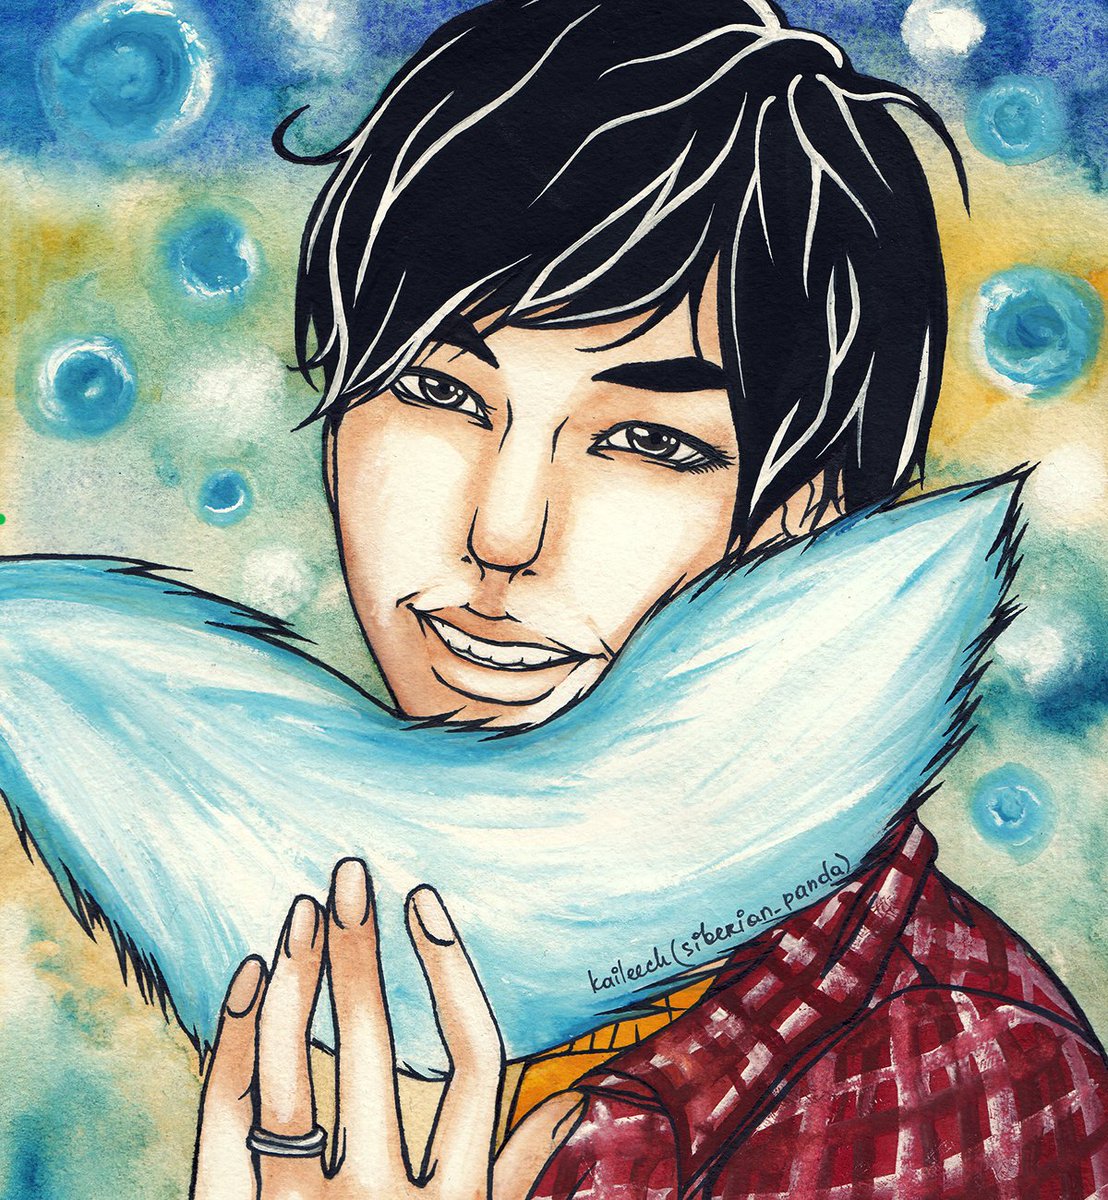 Another old #fanart on #ChaDaeWoong (#LeeSeunggi) from #MyGirlfriendIsaGumiho 👦🏻💙🦊 Yes, again 2012
#이승기 #내여자친구는구미호 #drawing #traditionalart #art #dramafanart #kdrama #kdramafanart